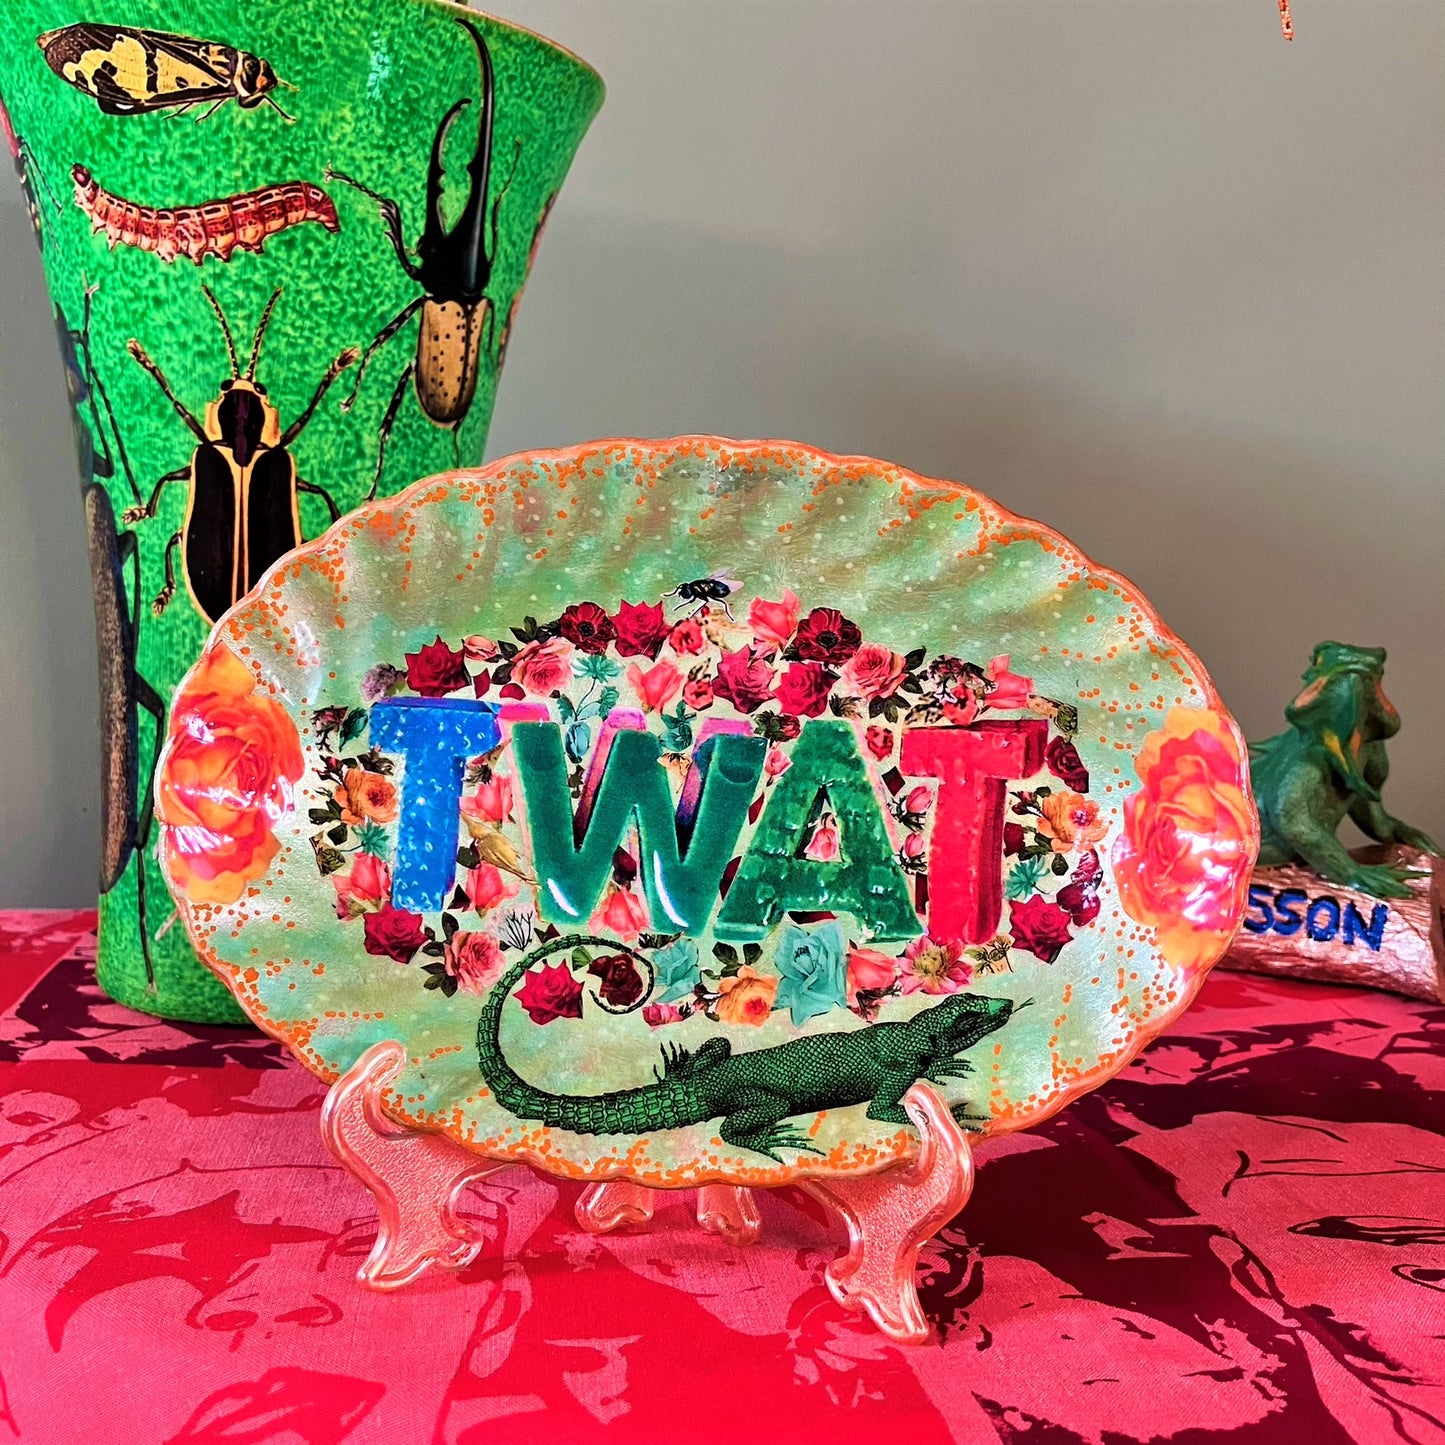 Green Upcycled Wall Plate - "Twat" - by House of Frisson